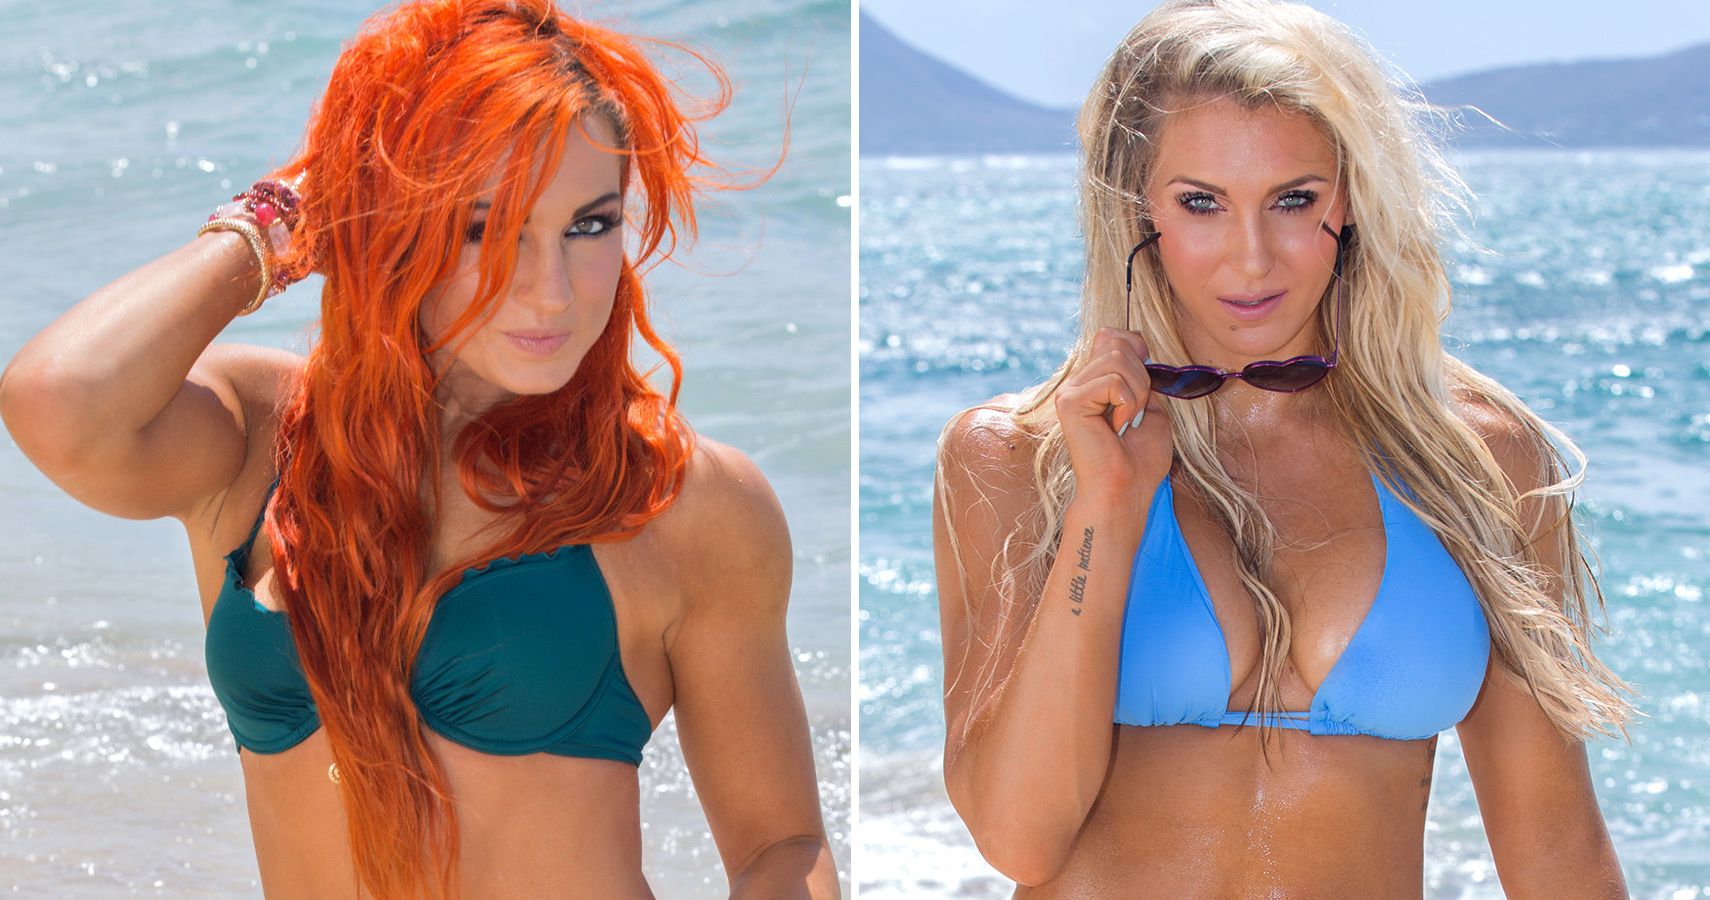 20 WWE Diva Bikini Pictures That You've Probably Never Seen Before.